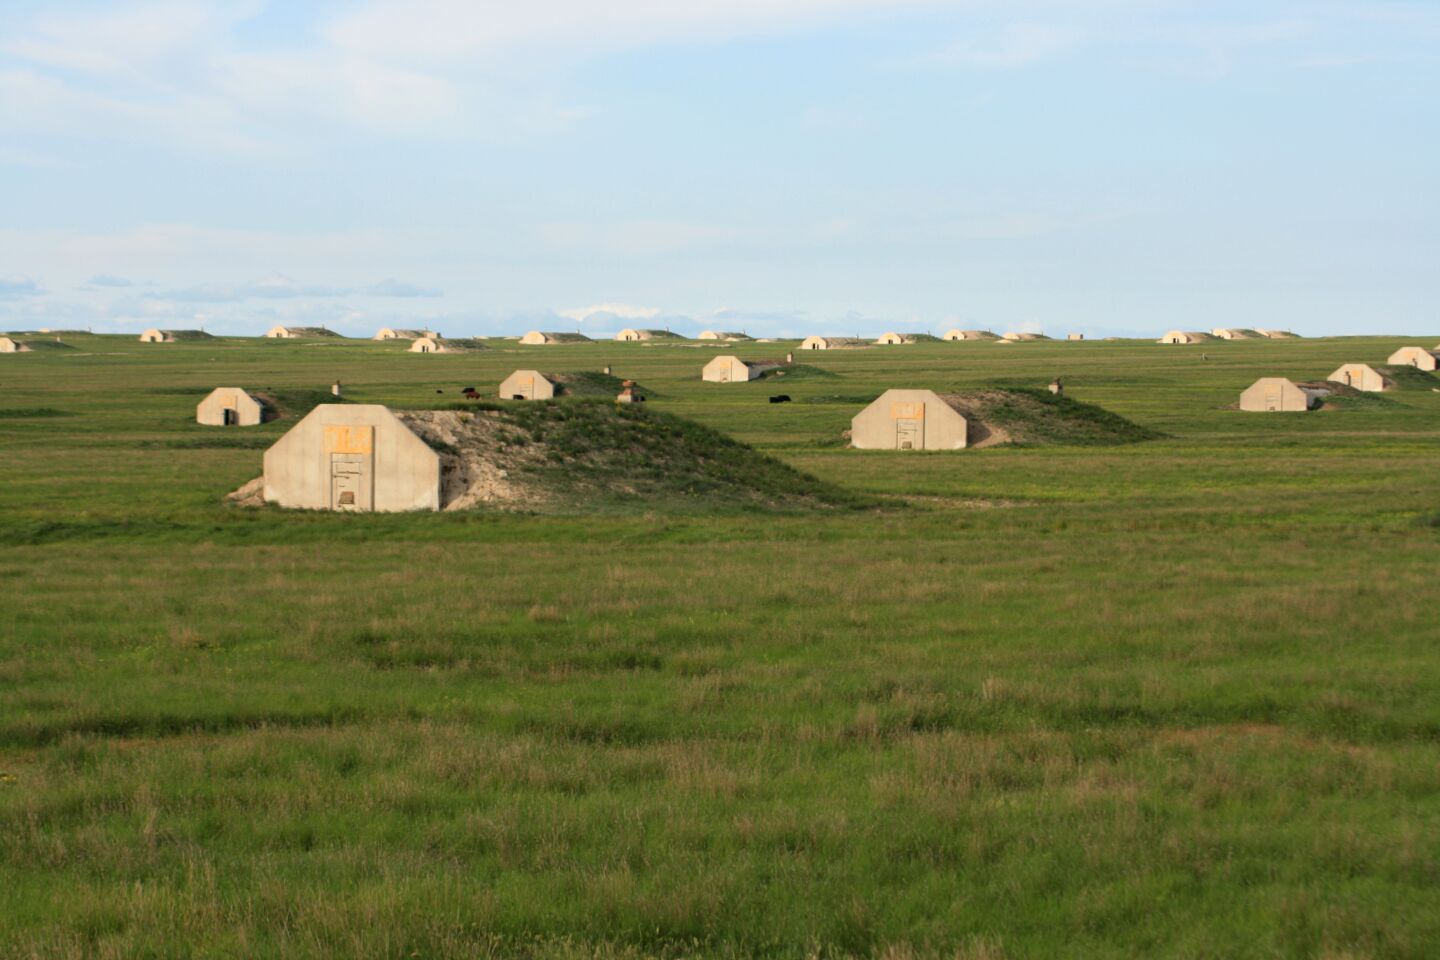 The bunkers.